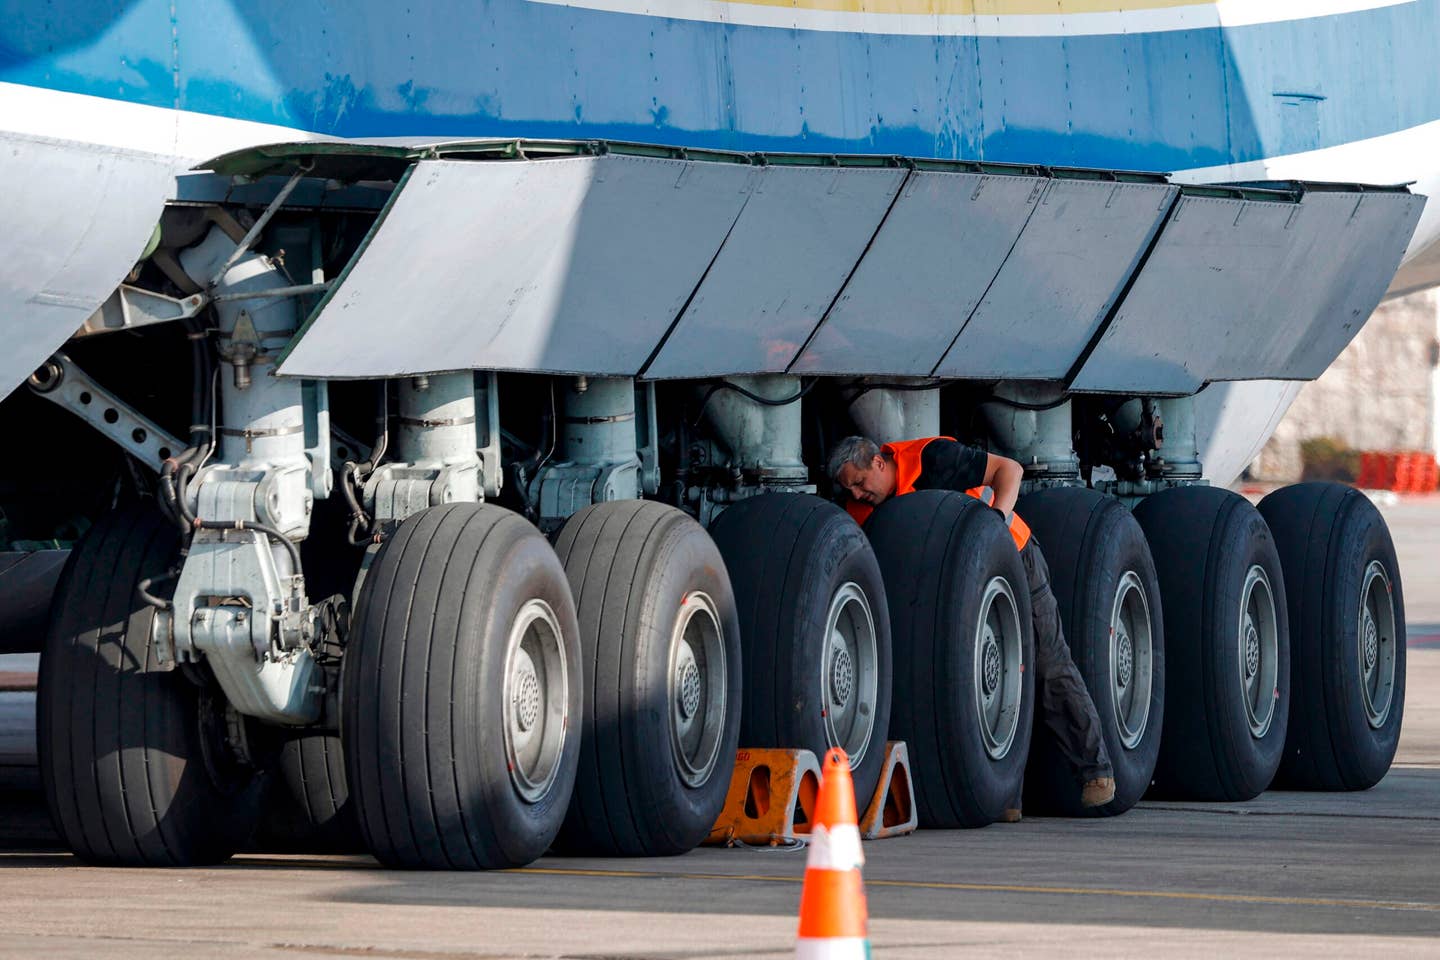 As part of its expansion from the An-124 Ruslan, the An-225 Mriya has 32 landing gear tires. <em>Photo by JACK GUEZ/AFP via Getty Images</em>